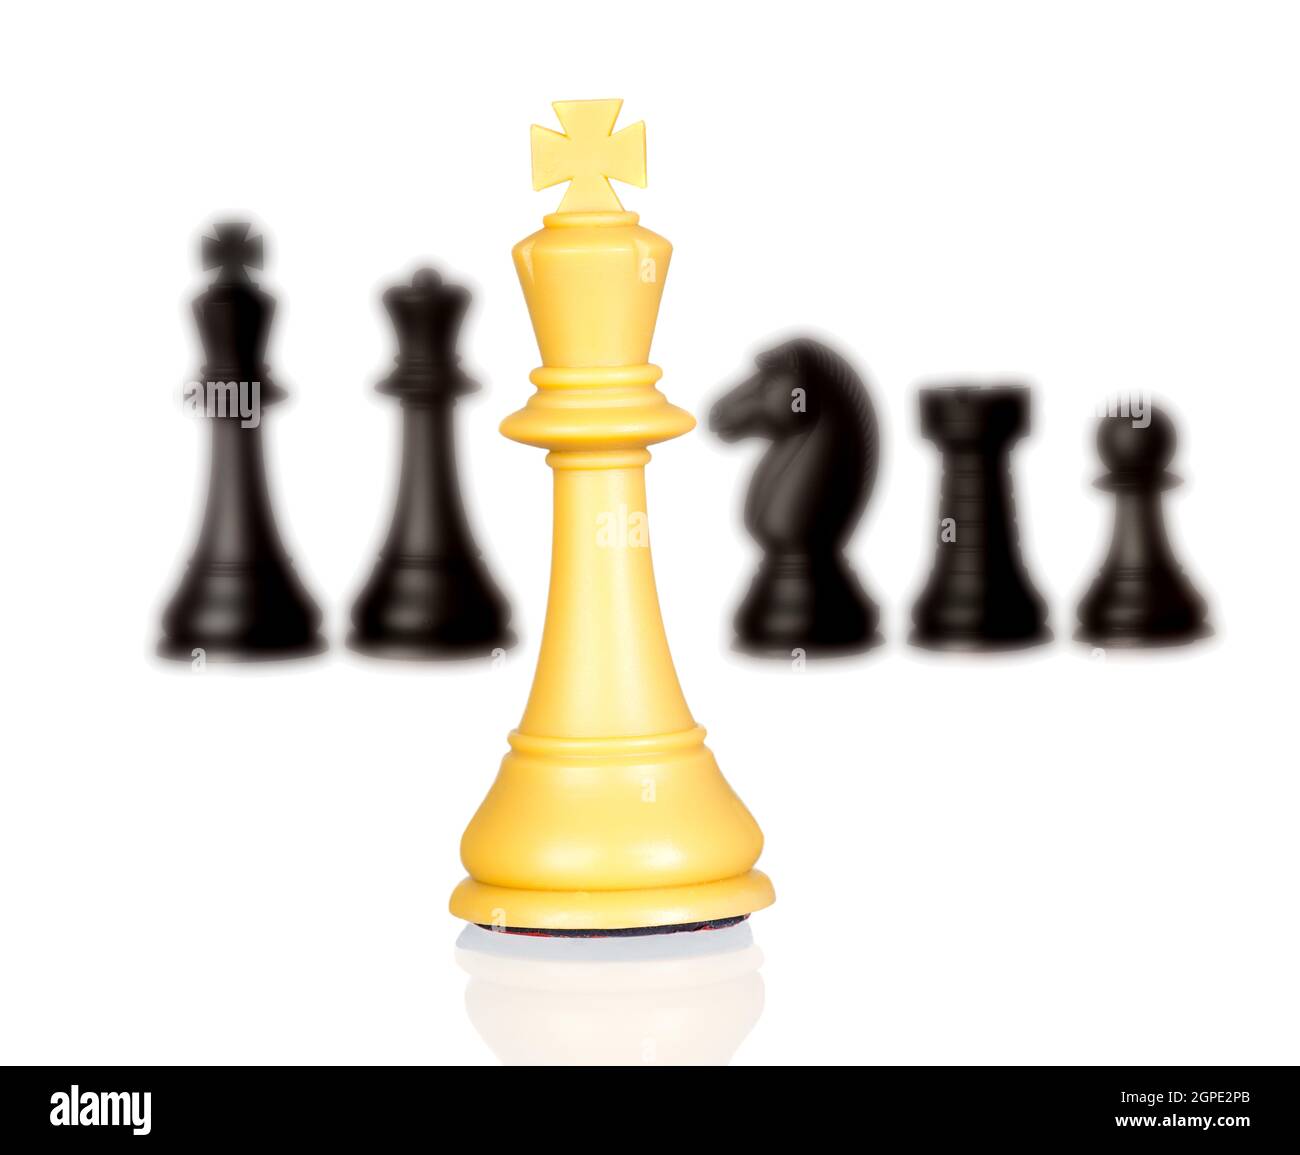 Chessmen isolated on a white background Stock Photo